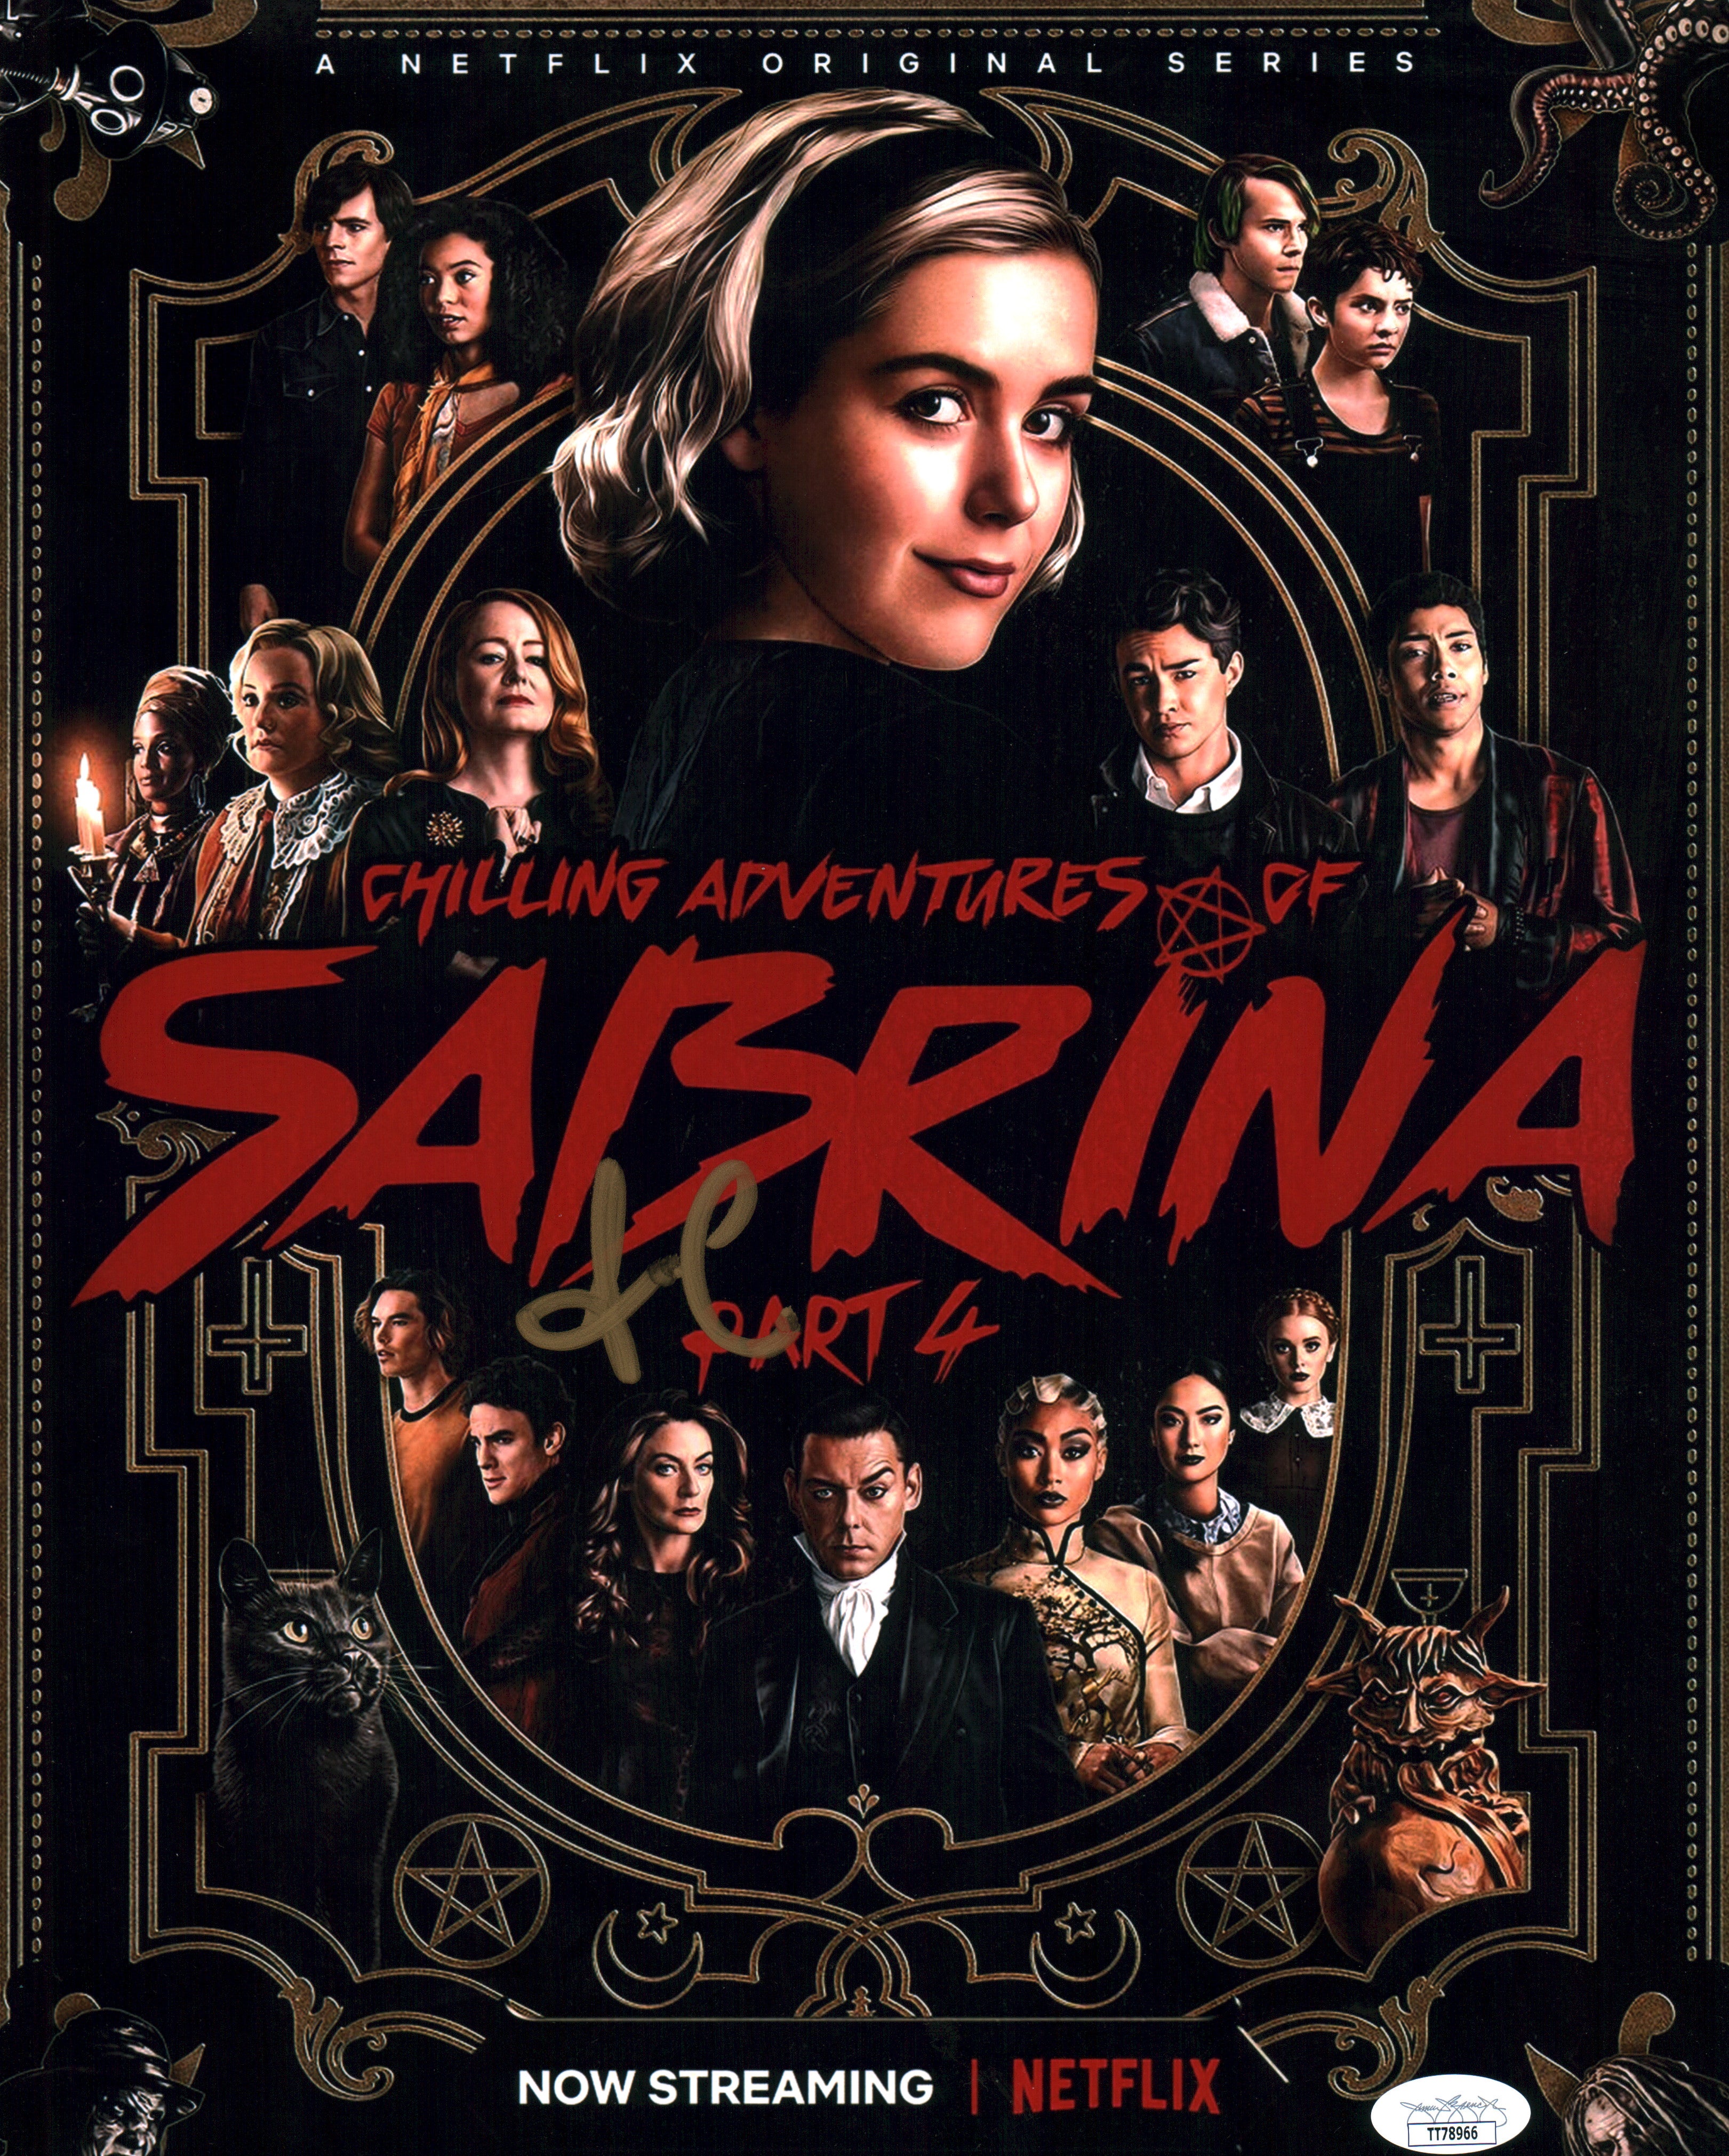 Luke Cook Chilling Adventures of Sabrina 11x14 Mini Poster Signed JSA Certified Autograph GalaxyCon